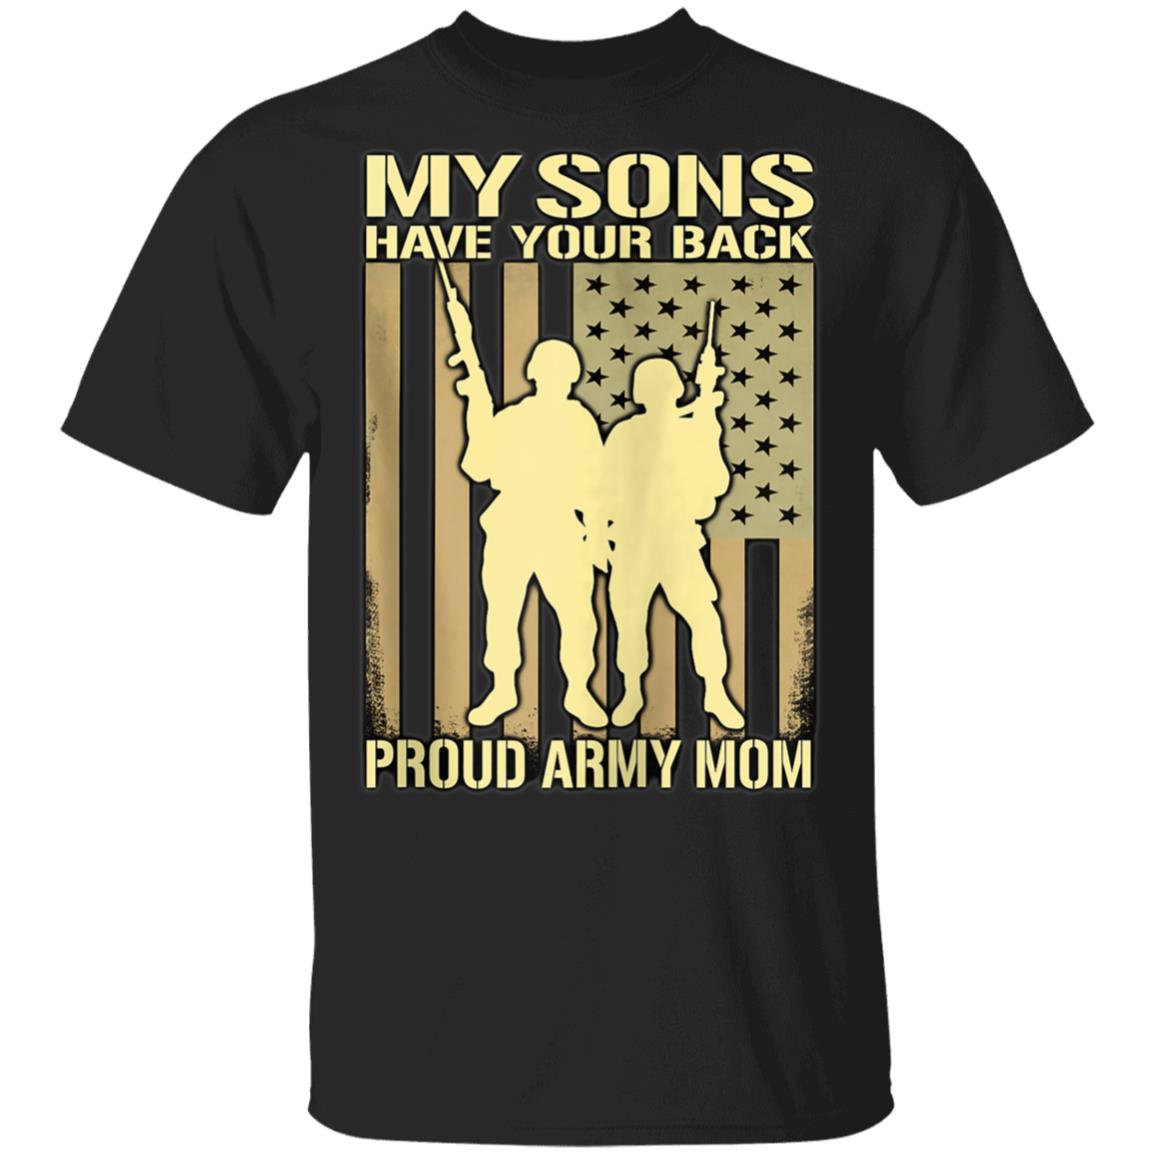 My Sons Have Your Back Tshirt Proud Army Mom Shirts